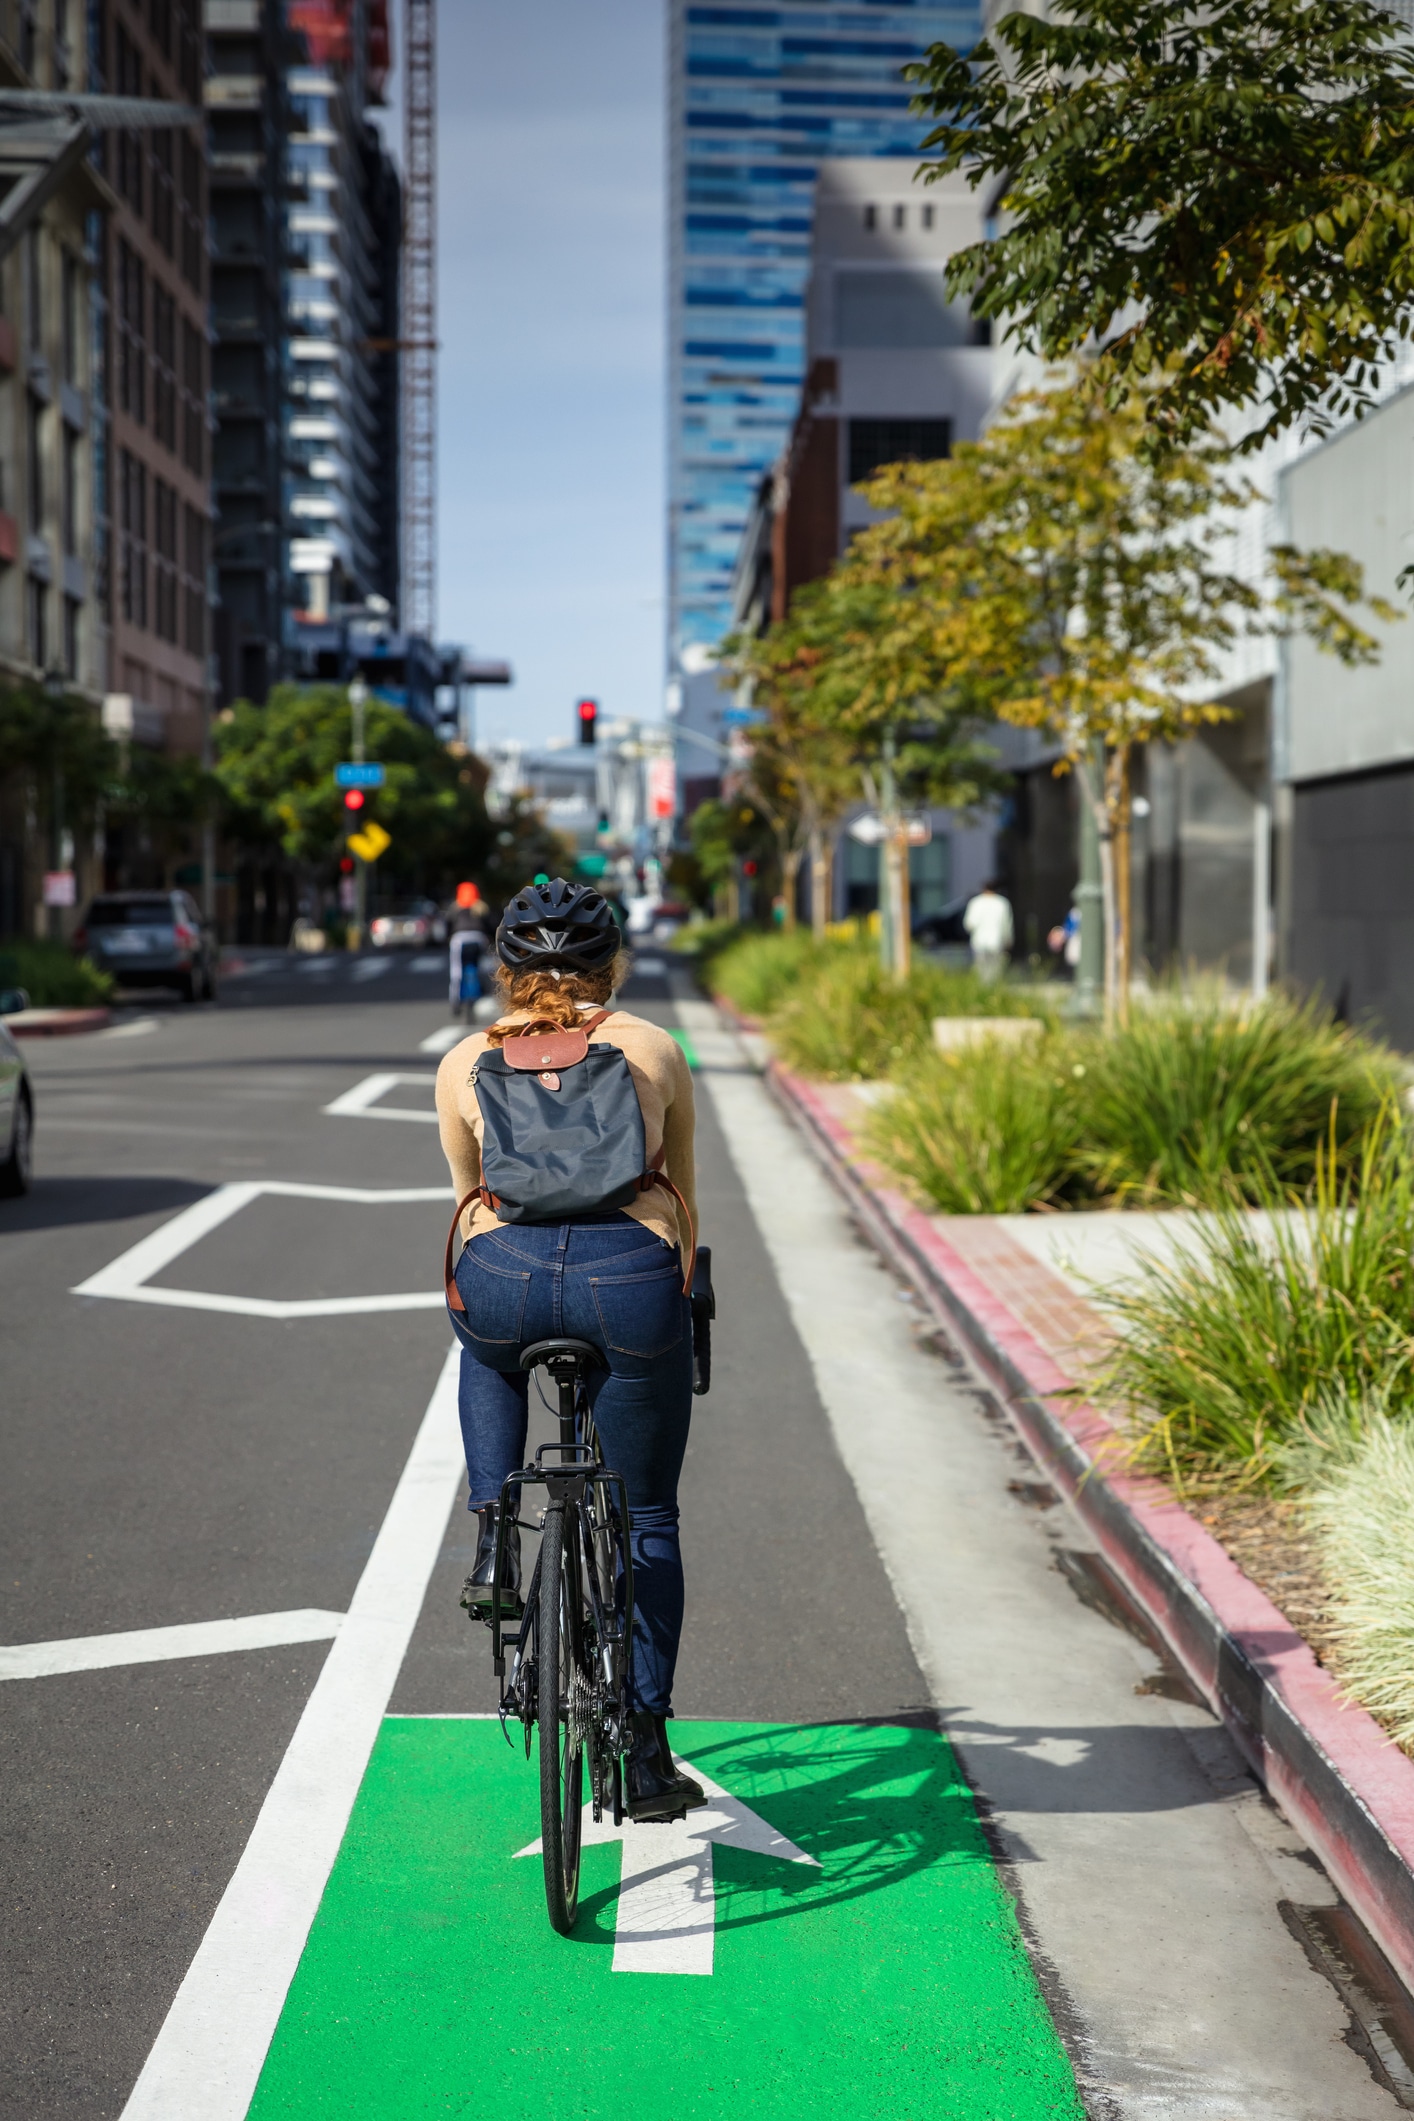 Do You Know the Six Different Types of Bike Lanes in California?